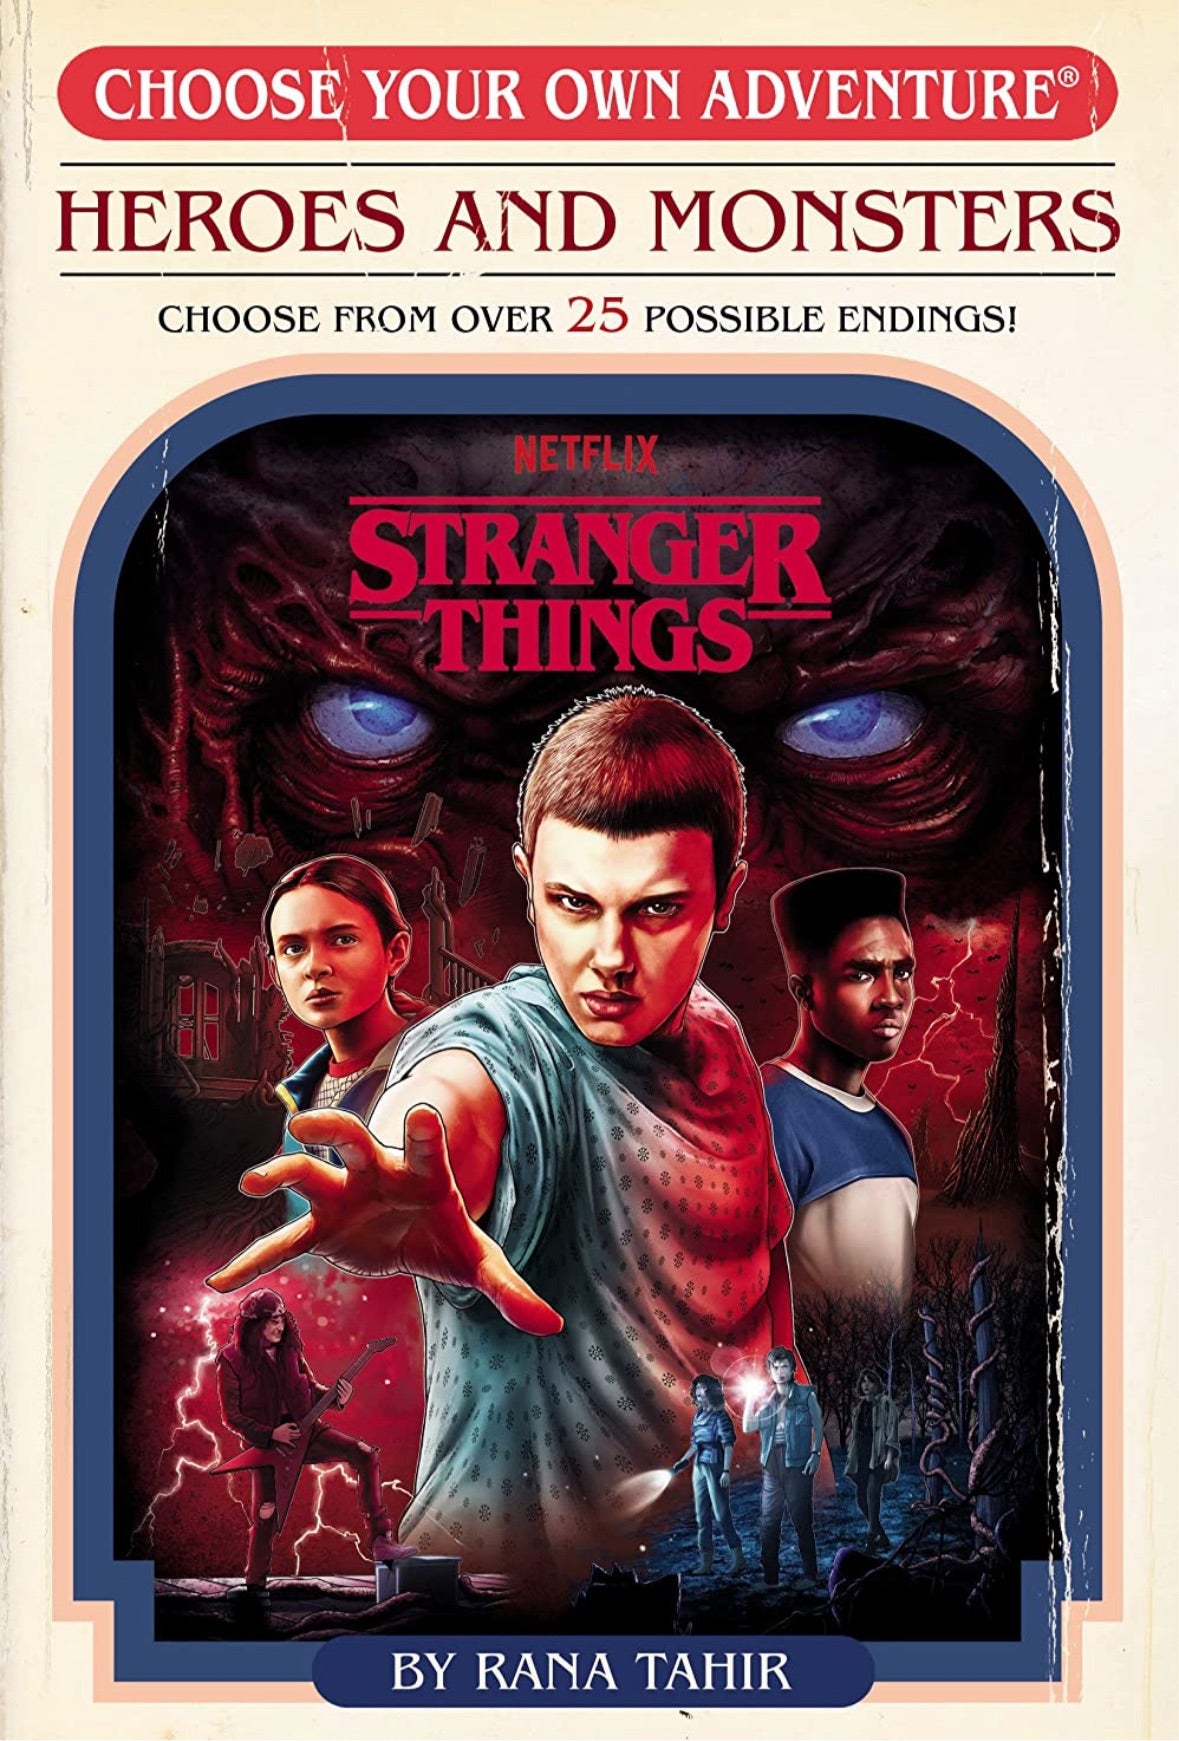 Stranger Things Heroes and Monsters (Choose Your Own Adventure)